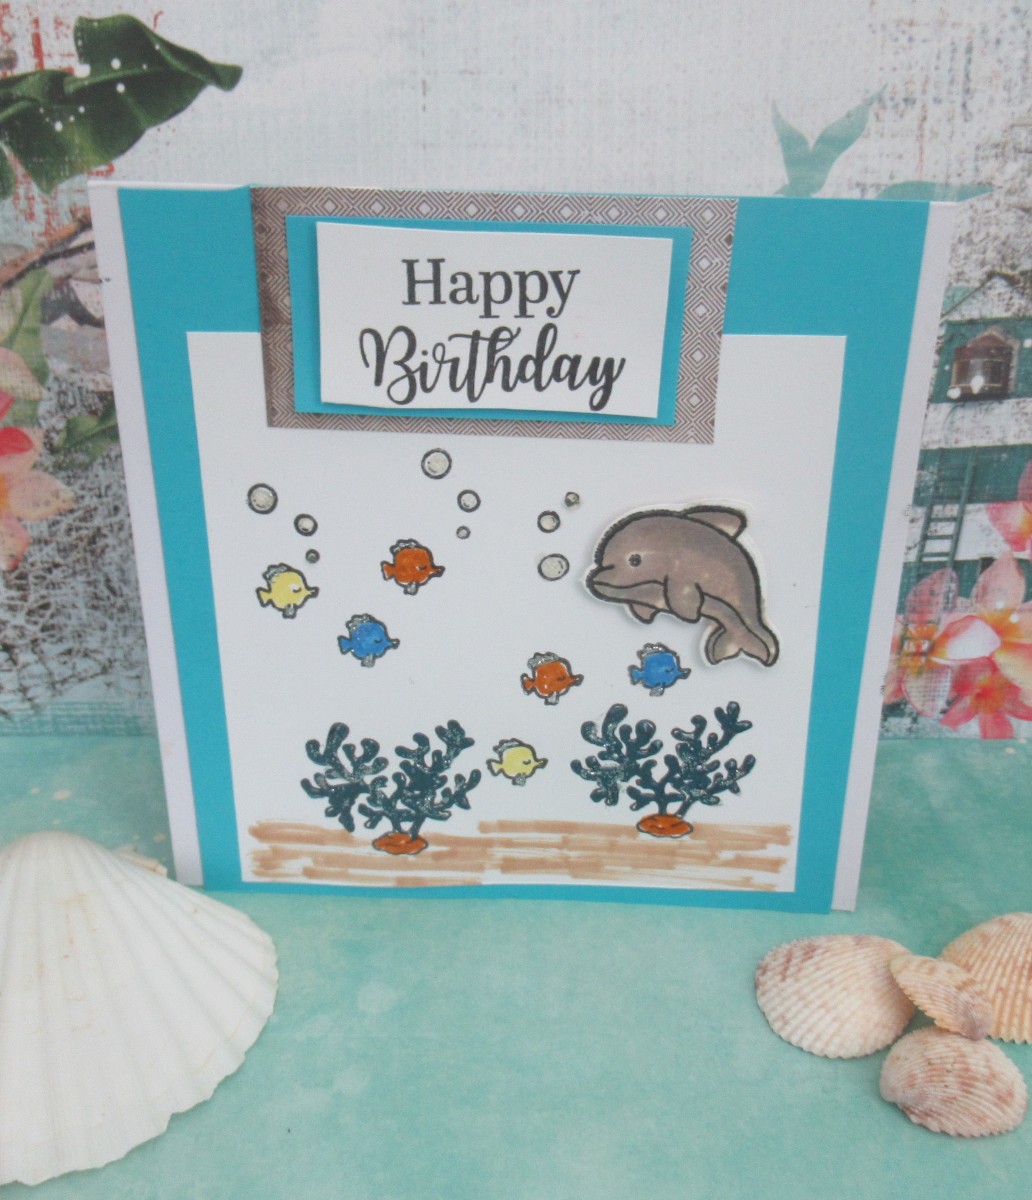 Yes, you can use stamping, die cutting and coloring on one card.